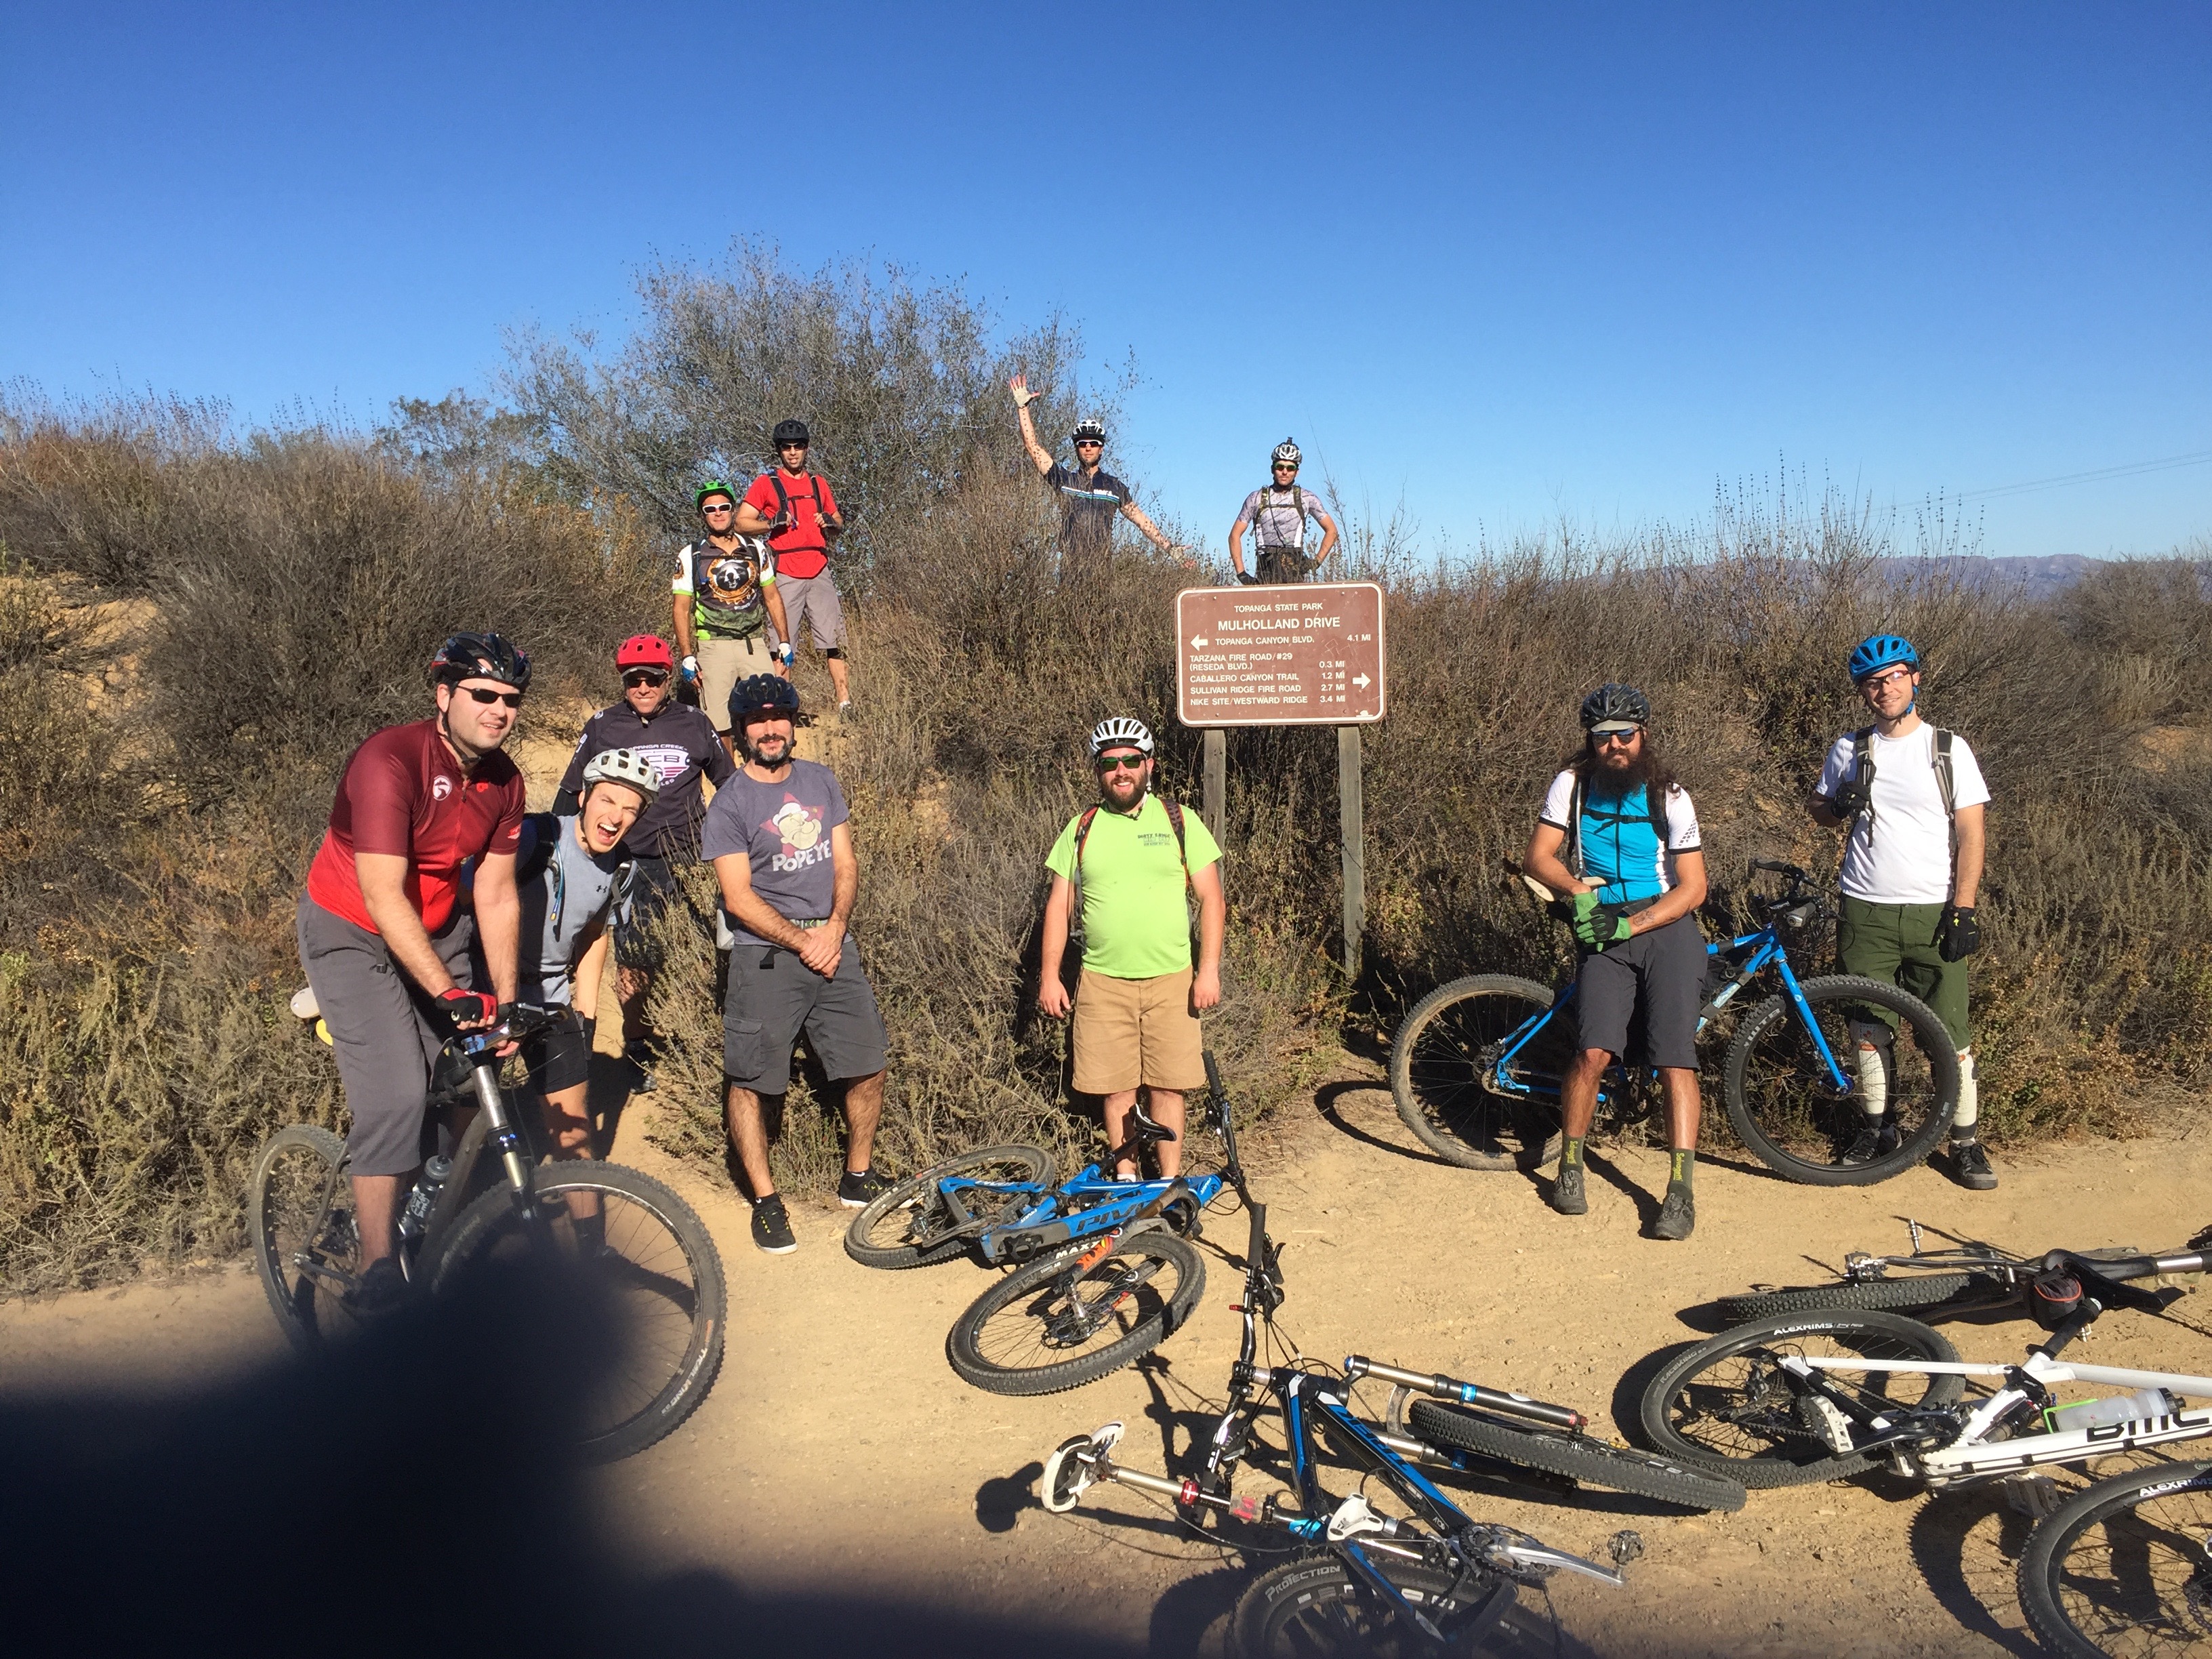 Our weekly ride. This week we rode to the old Nike Missile base.